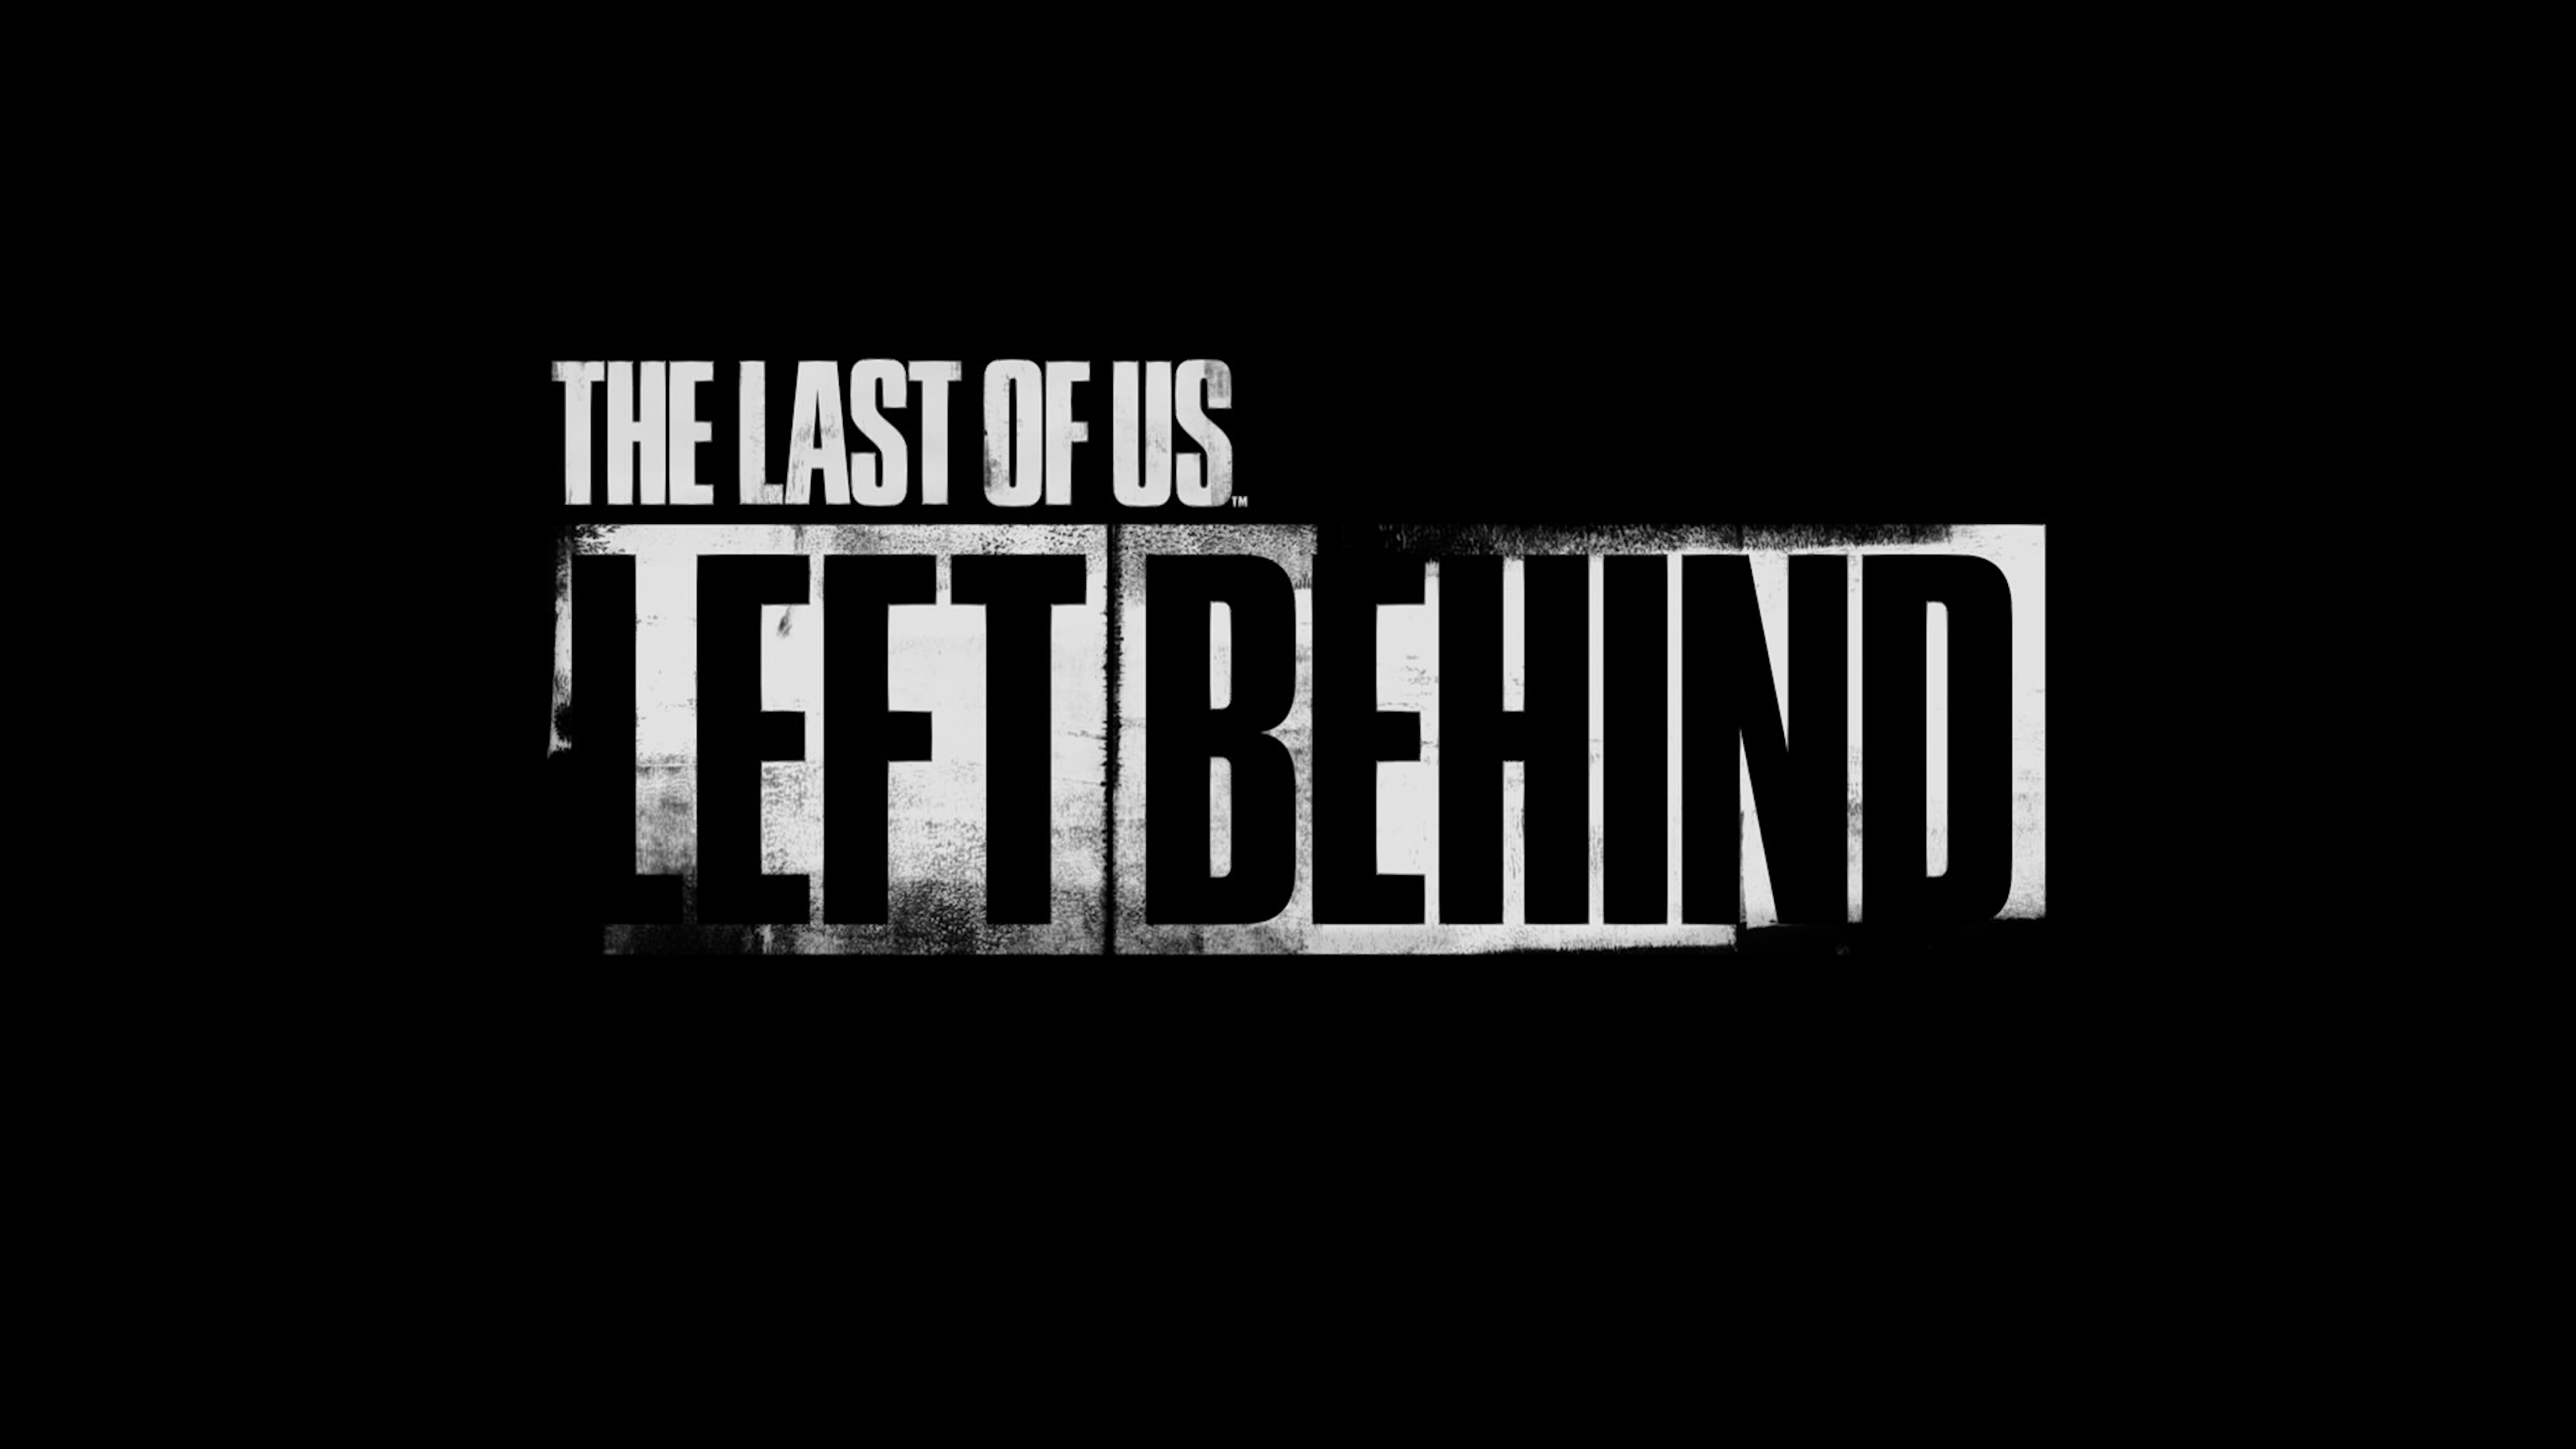 Chapter 3 - So Close - Walkthrough - Left Behind DLC, The Last of Us Part  I